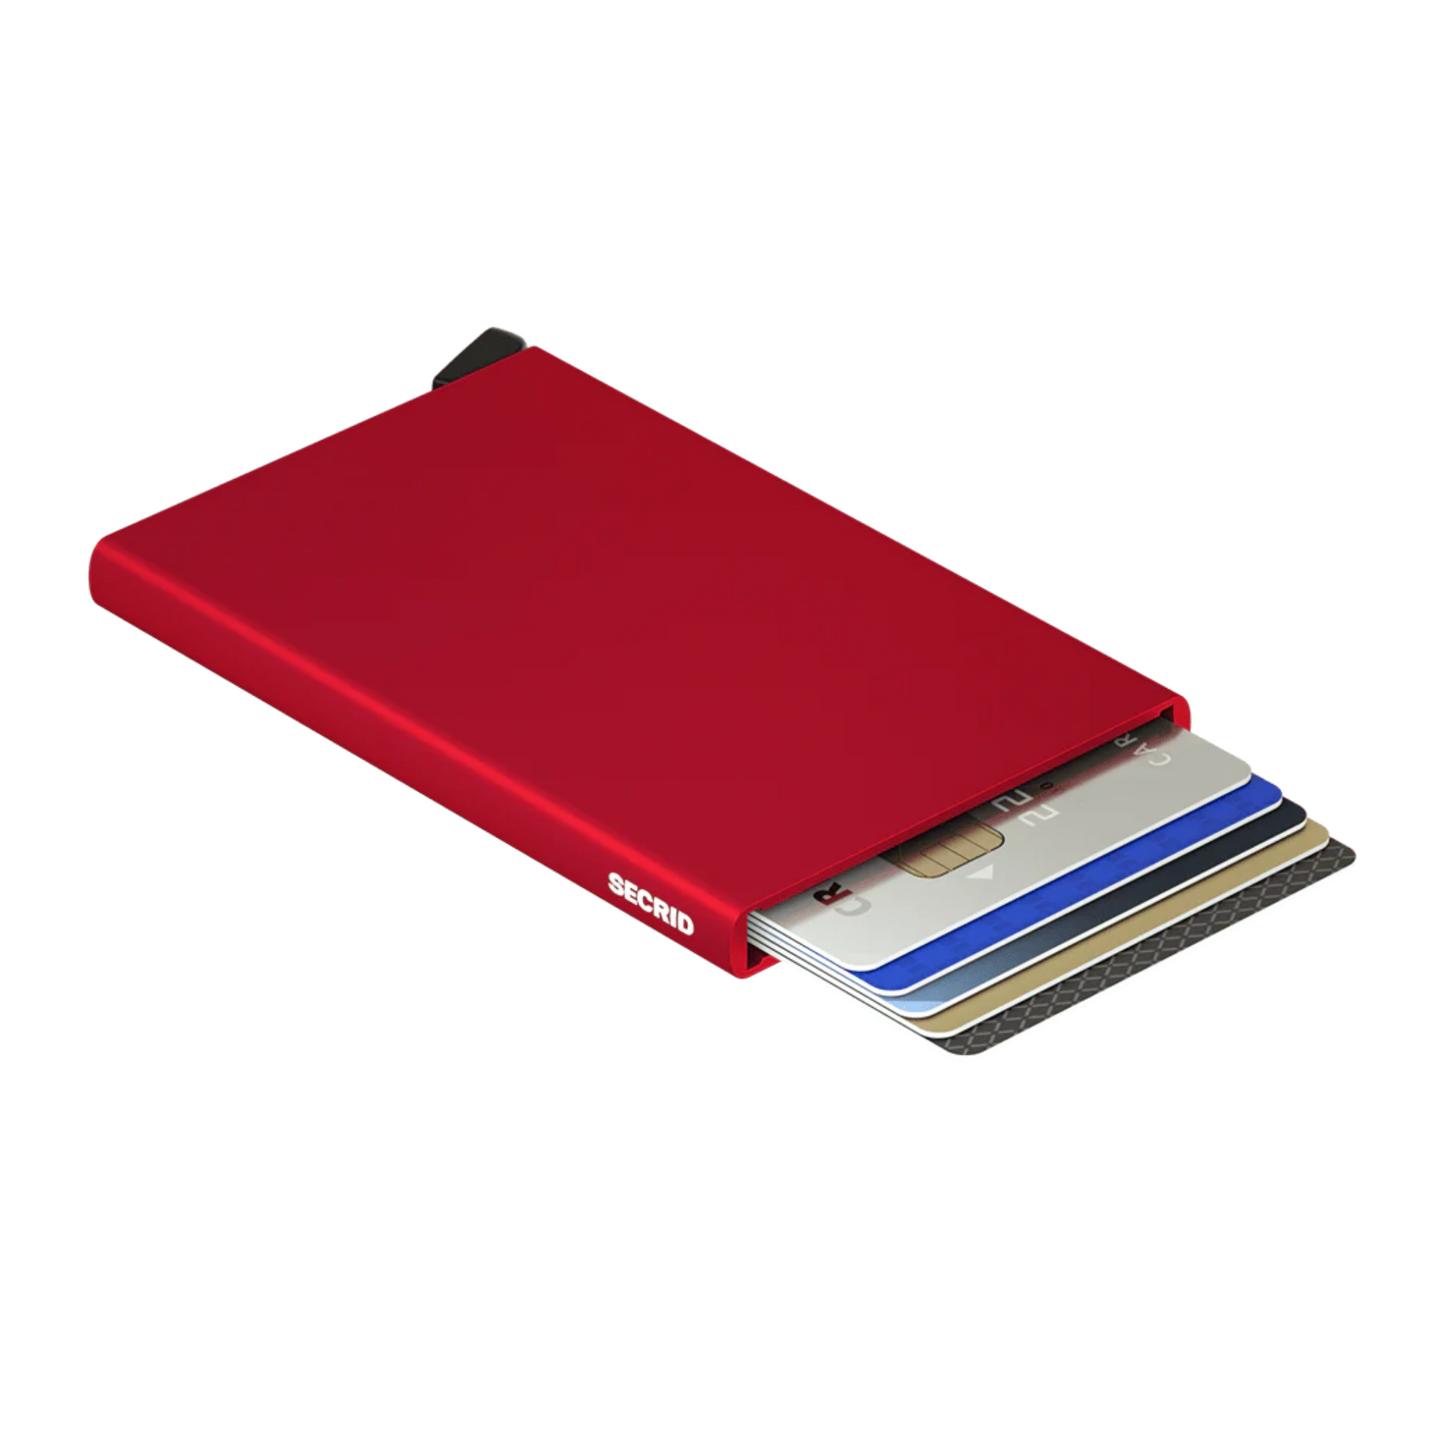 Metallic red wallet is laying on its side with 6 cards shown in the holder. It has a black bottom tab and small white logo on side.